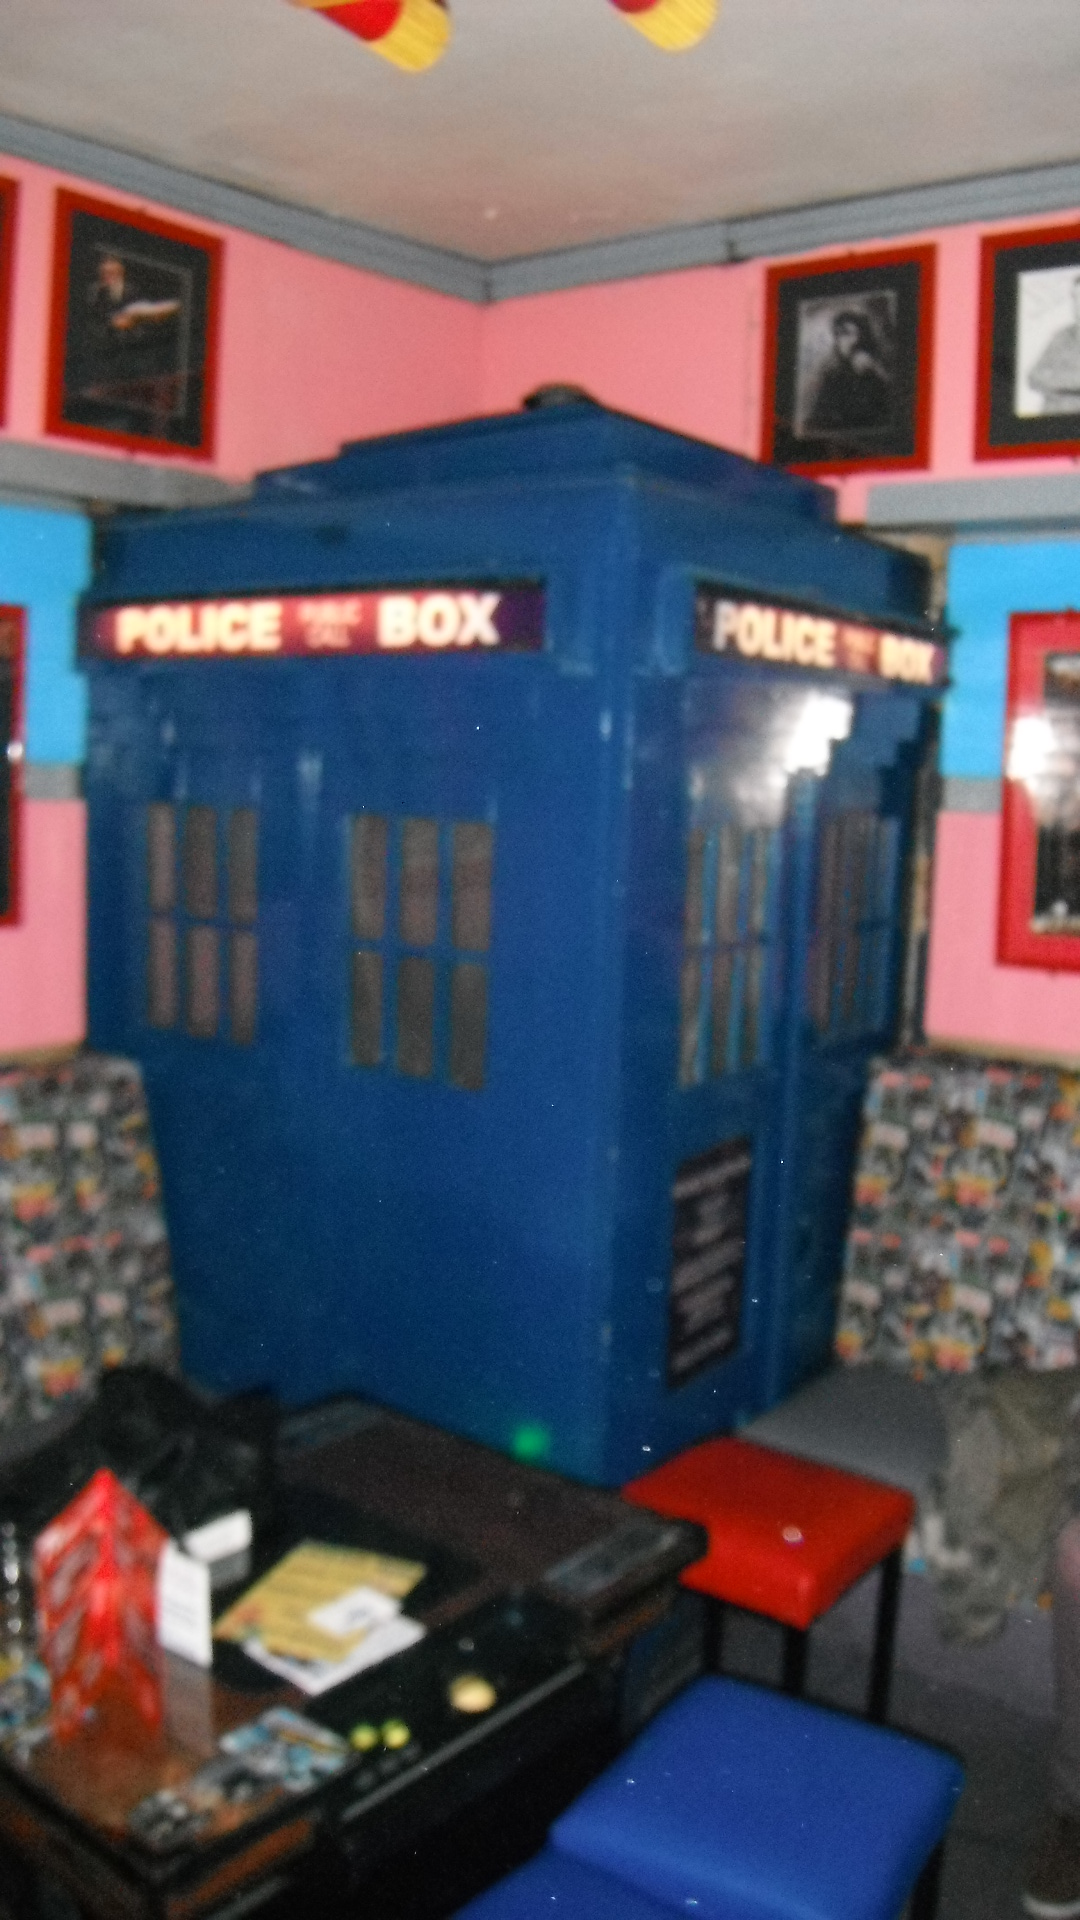 Photo taken by me – The TARDIS in FAB Café, Manchester